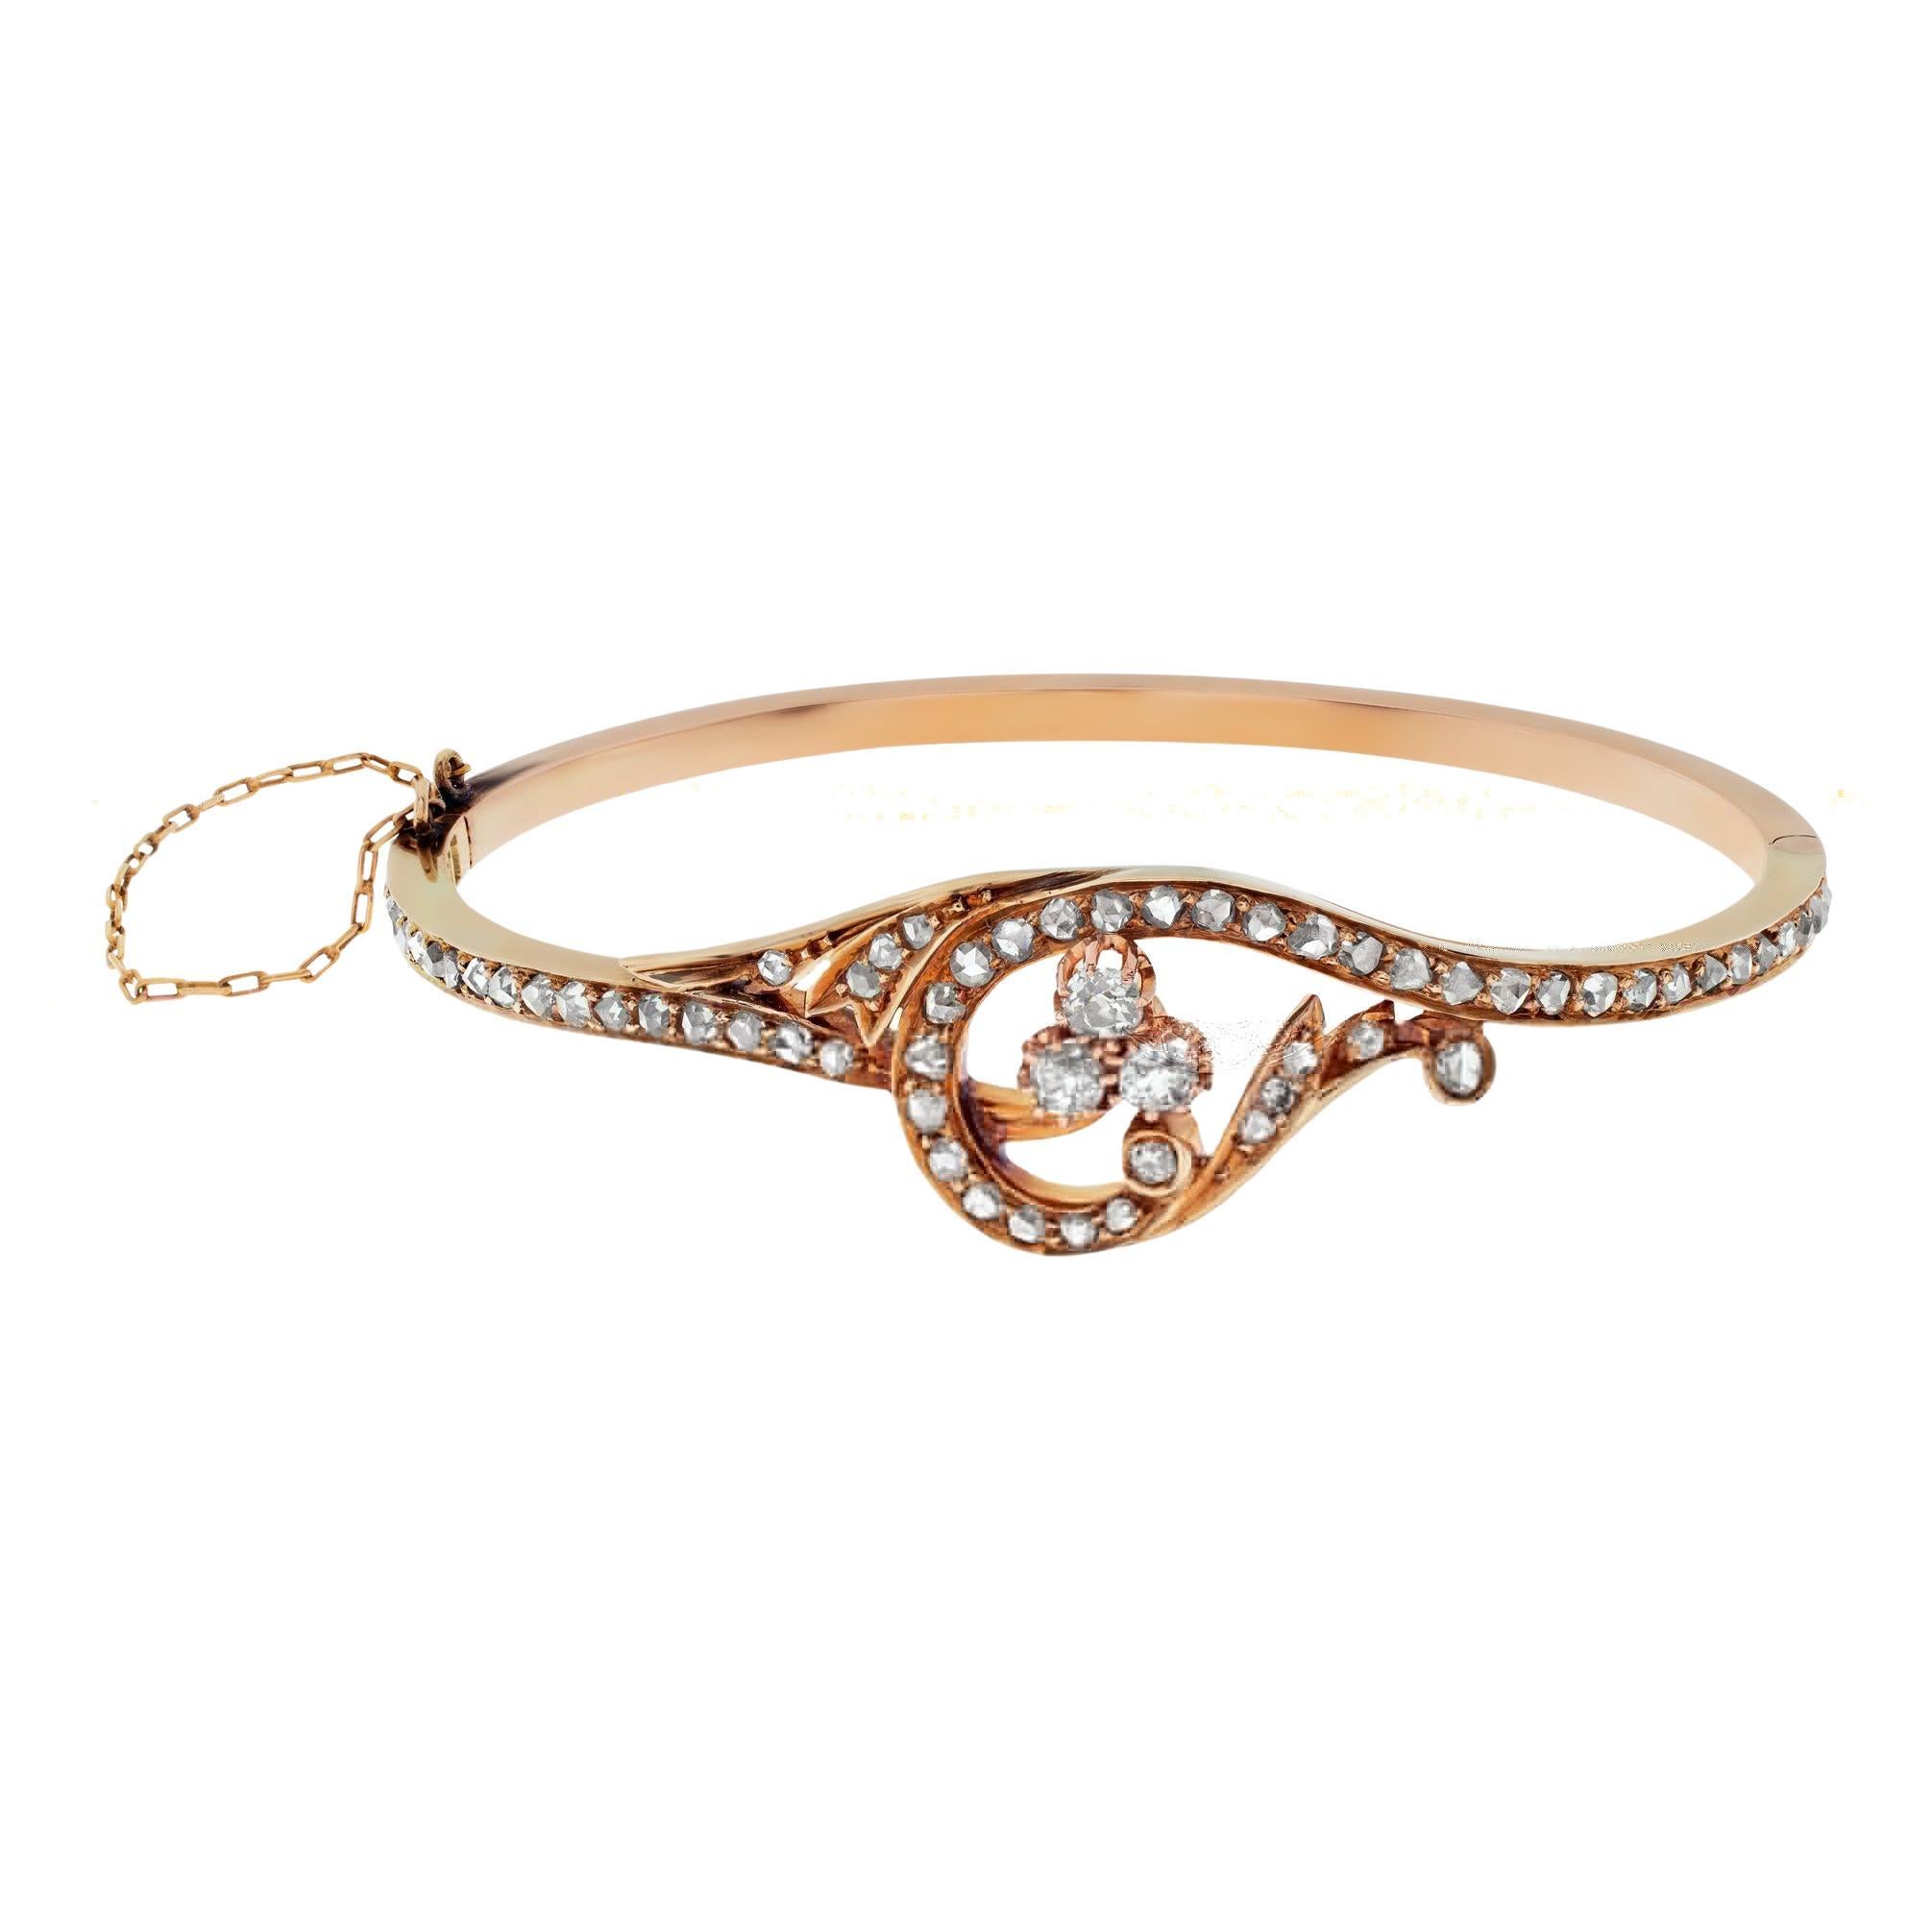 Edwardian bangle with rose cut diamonds set in rose gold. For Sale